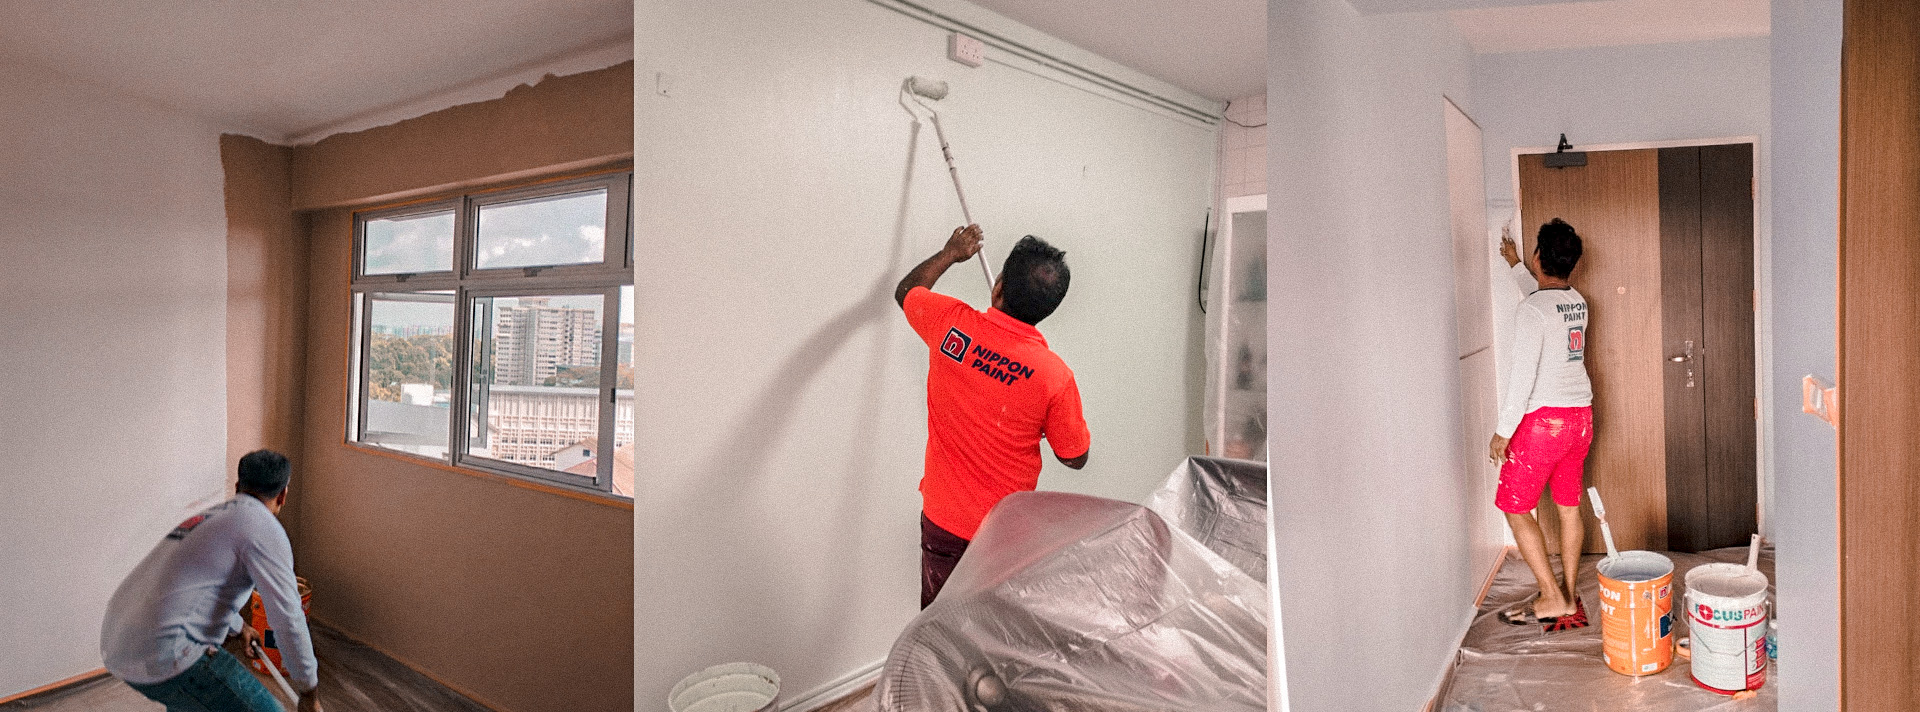 https://www.easycleansg.com/pages/painting-services